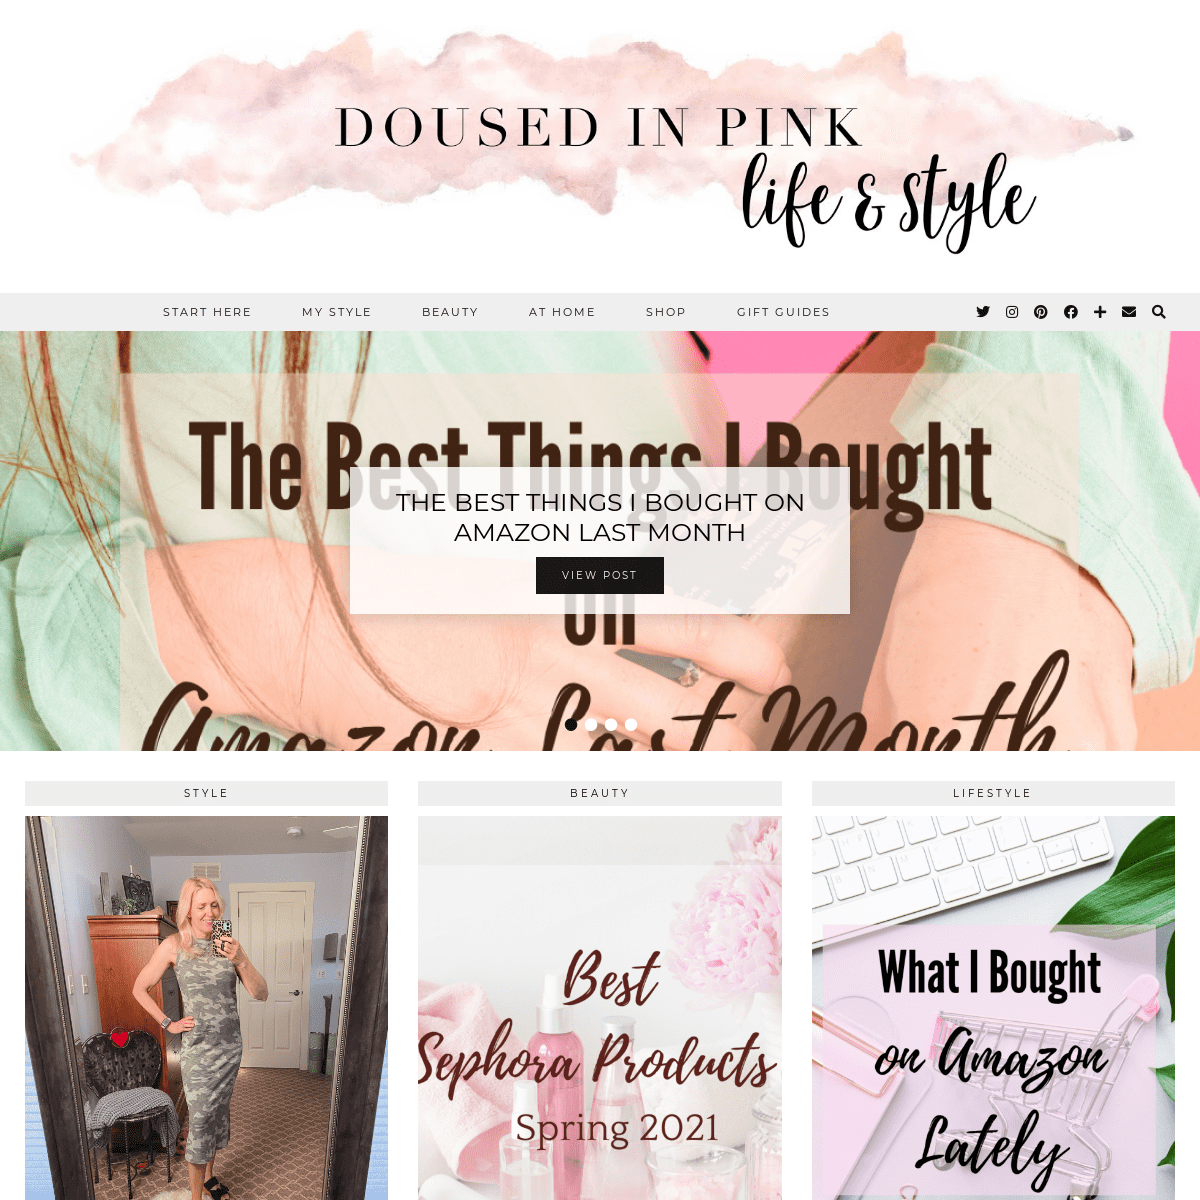 A complete backup of https://dousedinpink.com